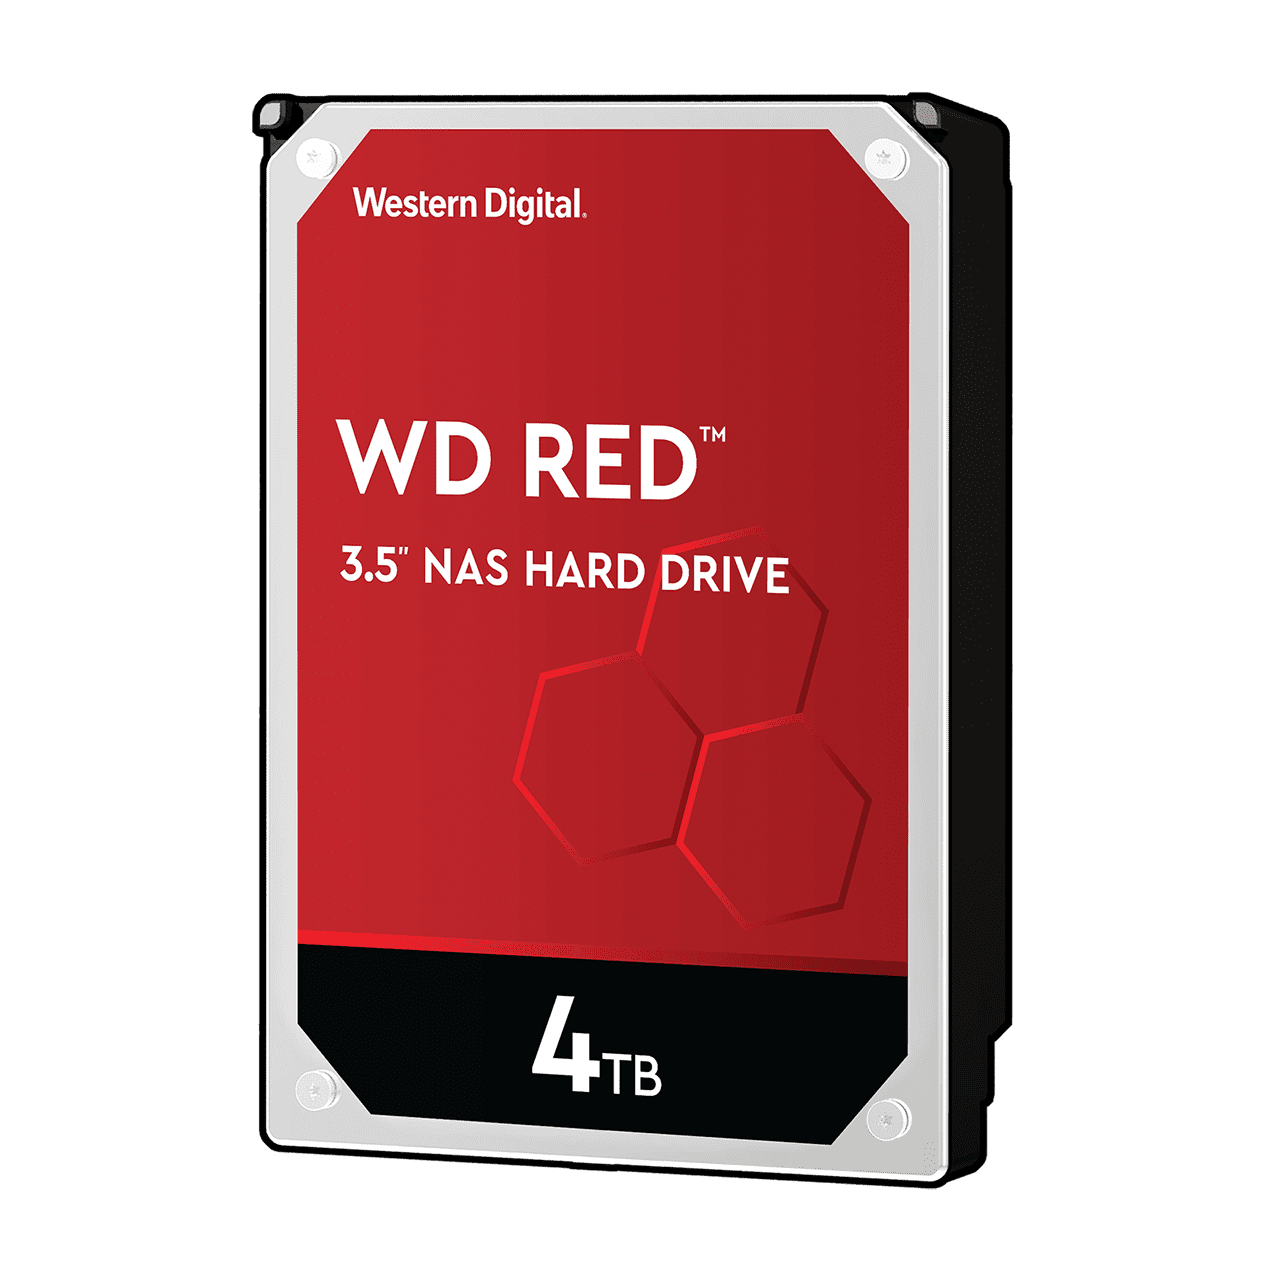 Dag helikopter commentaar Western Digital WD Red 4TB SATA 6Gb/s 256MB Cache Internal 8.9cm 3.5Inch  24x7 IntelliPower optimized for SOHO NAS systems 1-8 Bay HDD Bulk | Staples